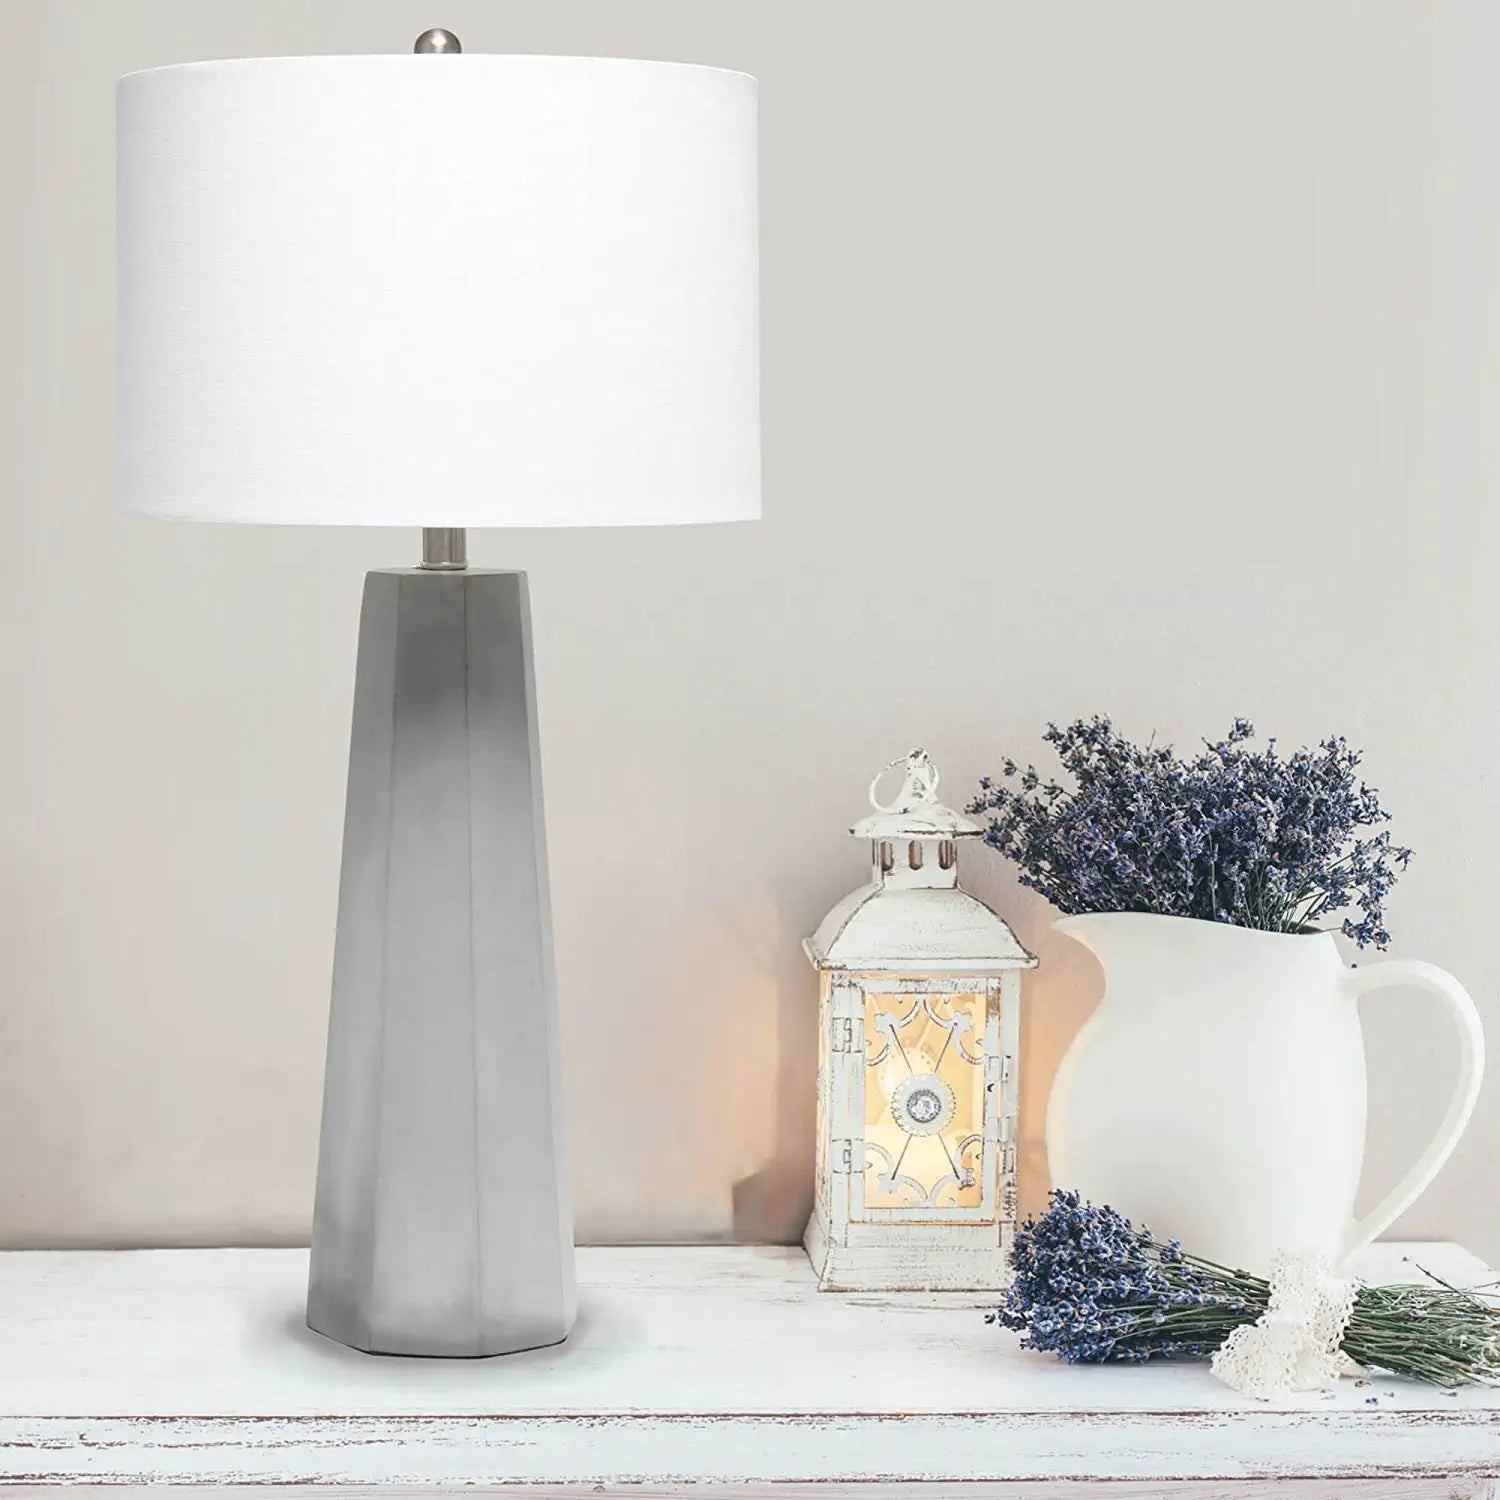 Lalia Home Modern Concrete Pillar Table Lamp with White Fabric Shade